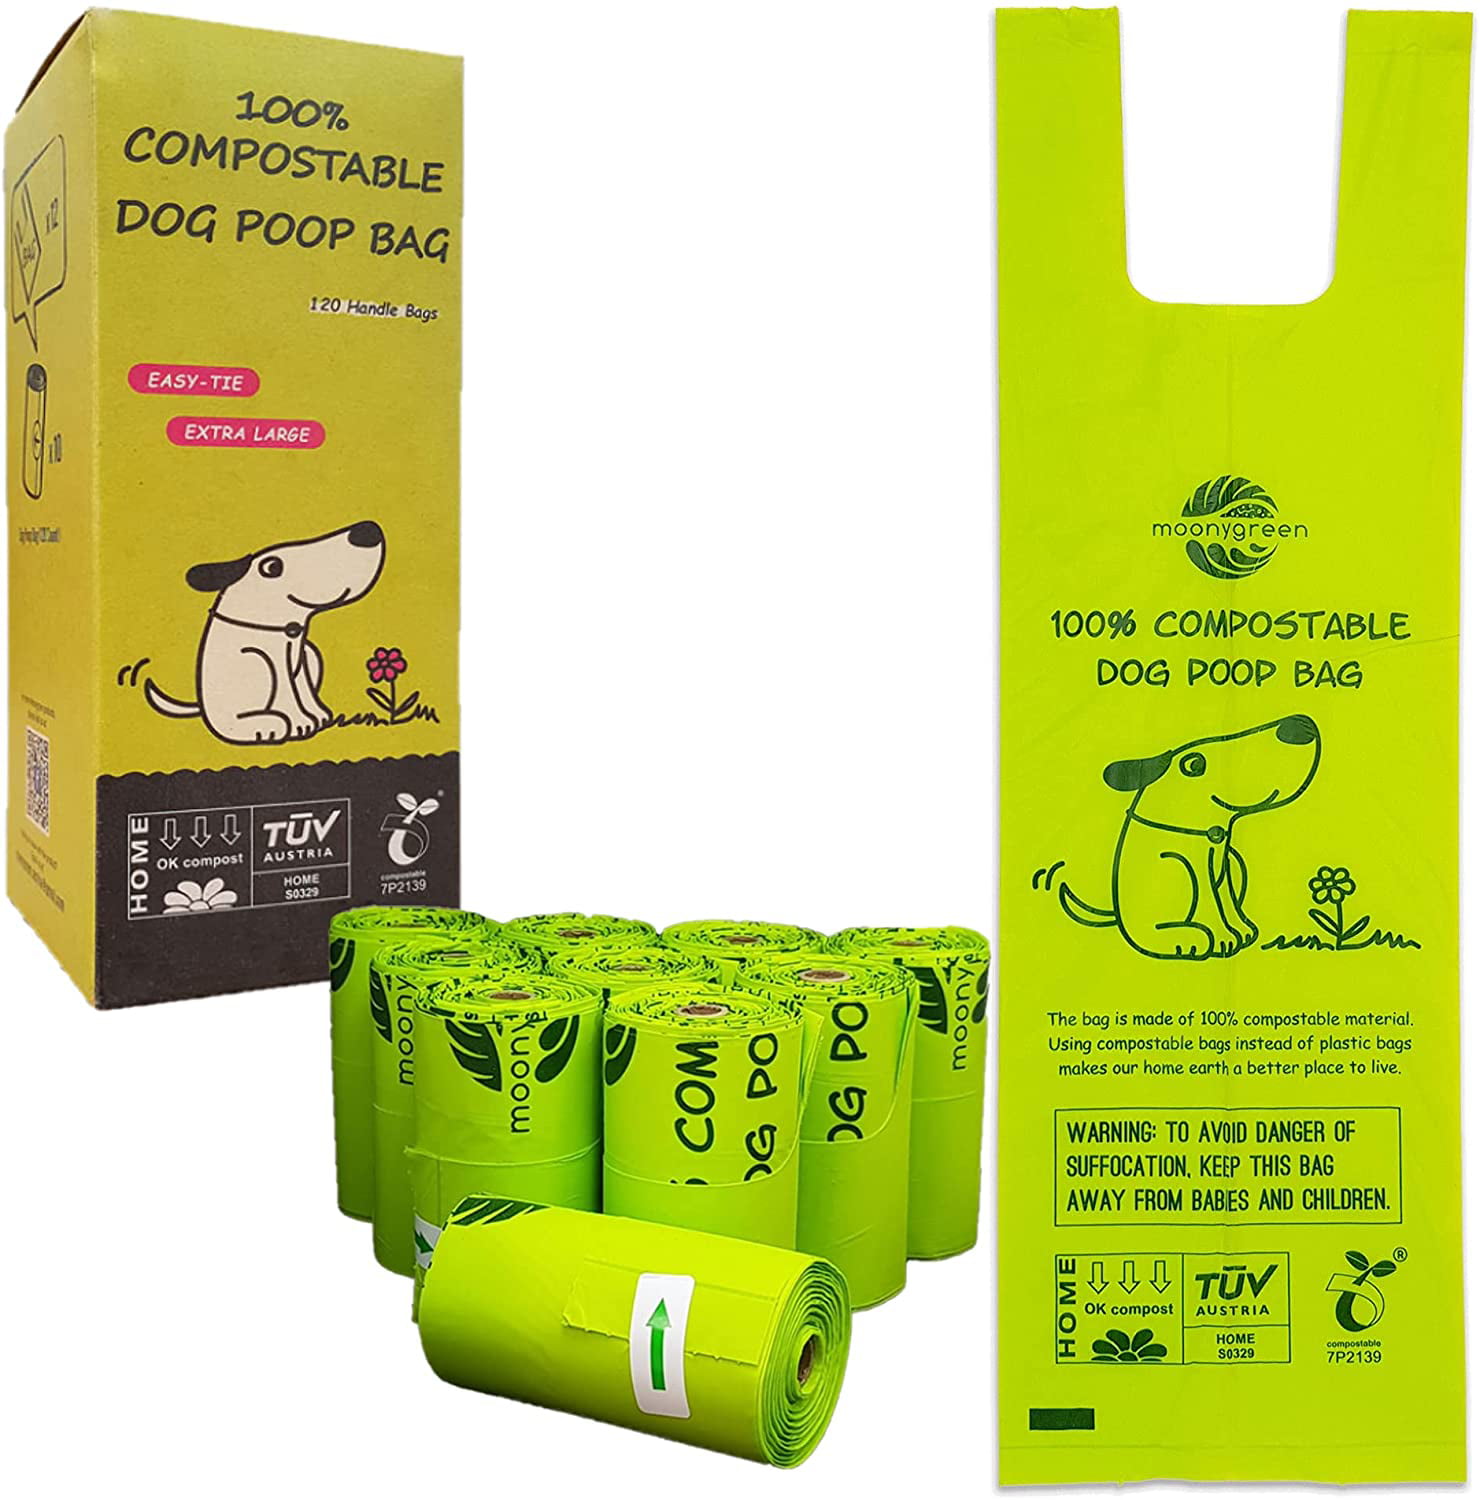 Biodegradable Doggy Poop Bag with Easy Tie Handles Refills Unscented Leak-Proof Doggie Bags for Poop Holder Compostable Dog Poop Bags with Handles Large Poo Waste Bag for Pets Eco-Friendly 